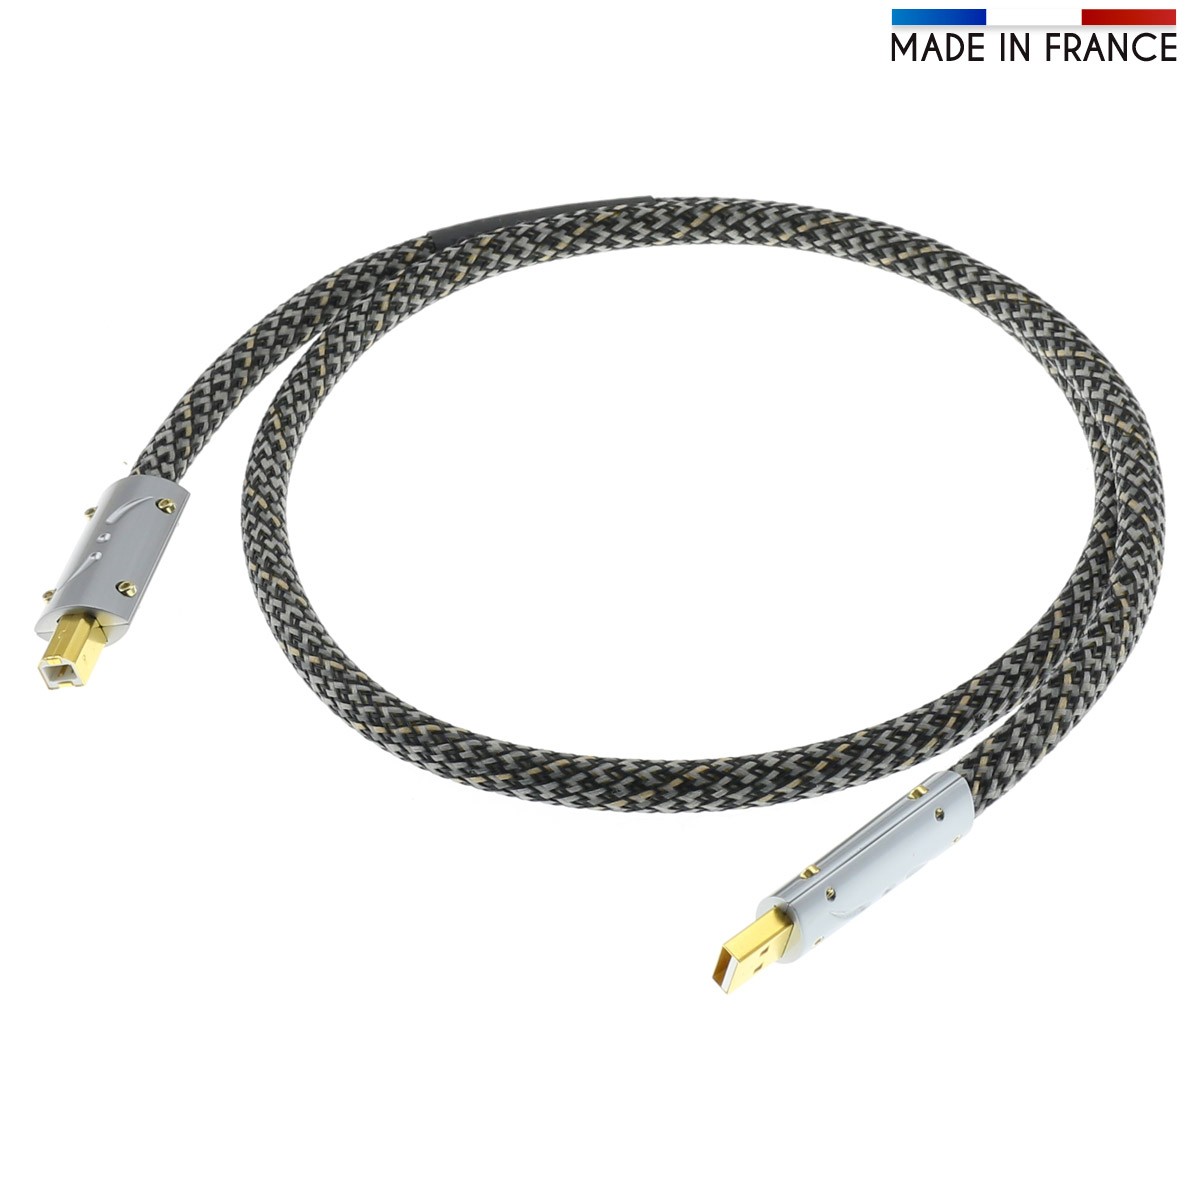 AUDIOPHONICS PULSAR Male USB-A to Male USB-B Cable Silver / Gold Plated 0.75m